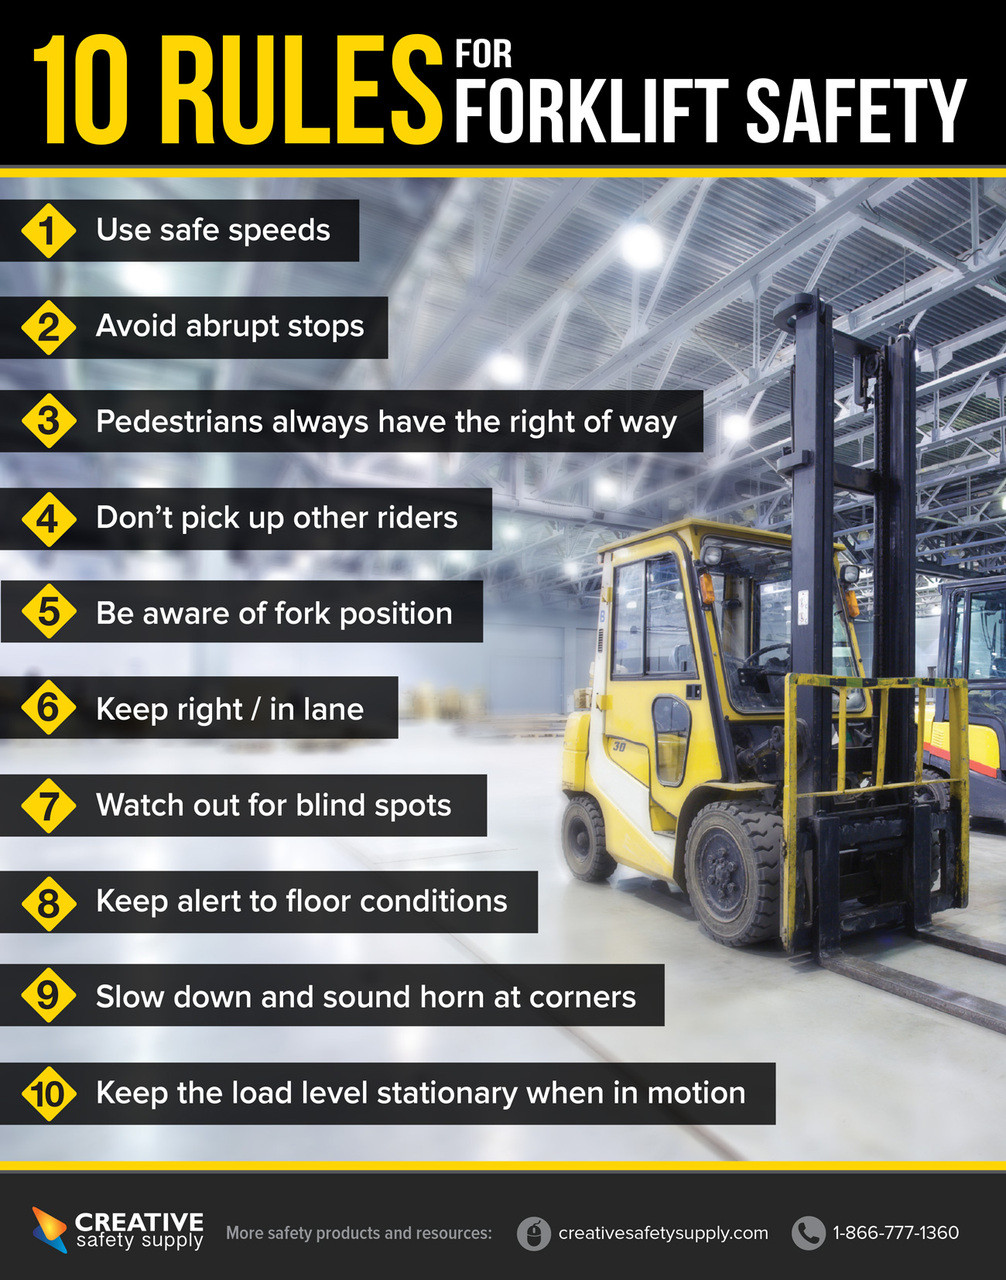 Heat Safety Products for Forklift Operators